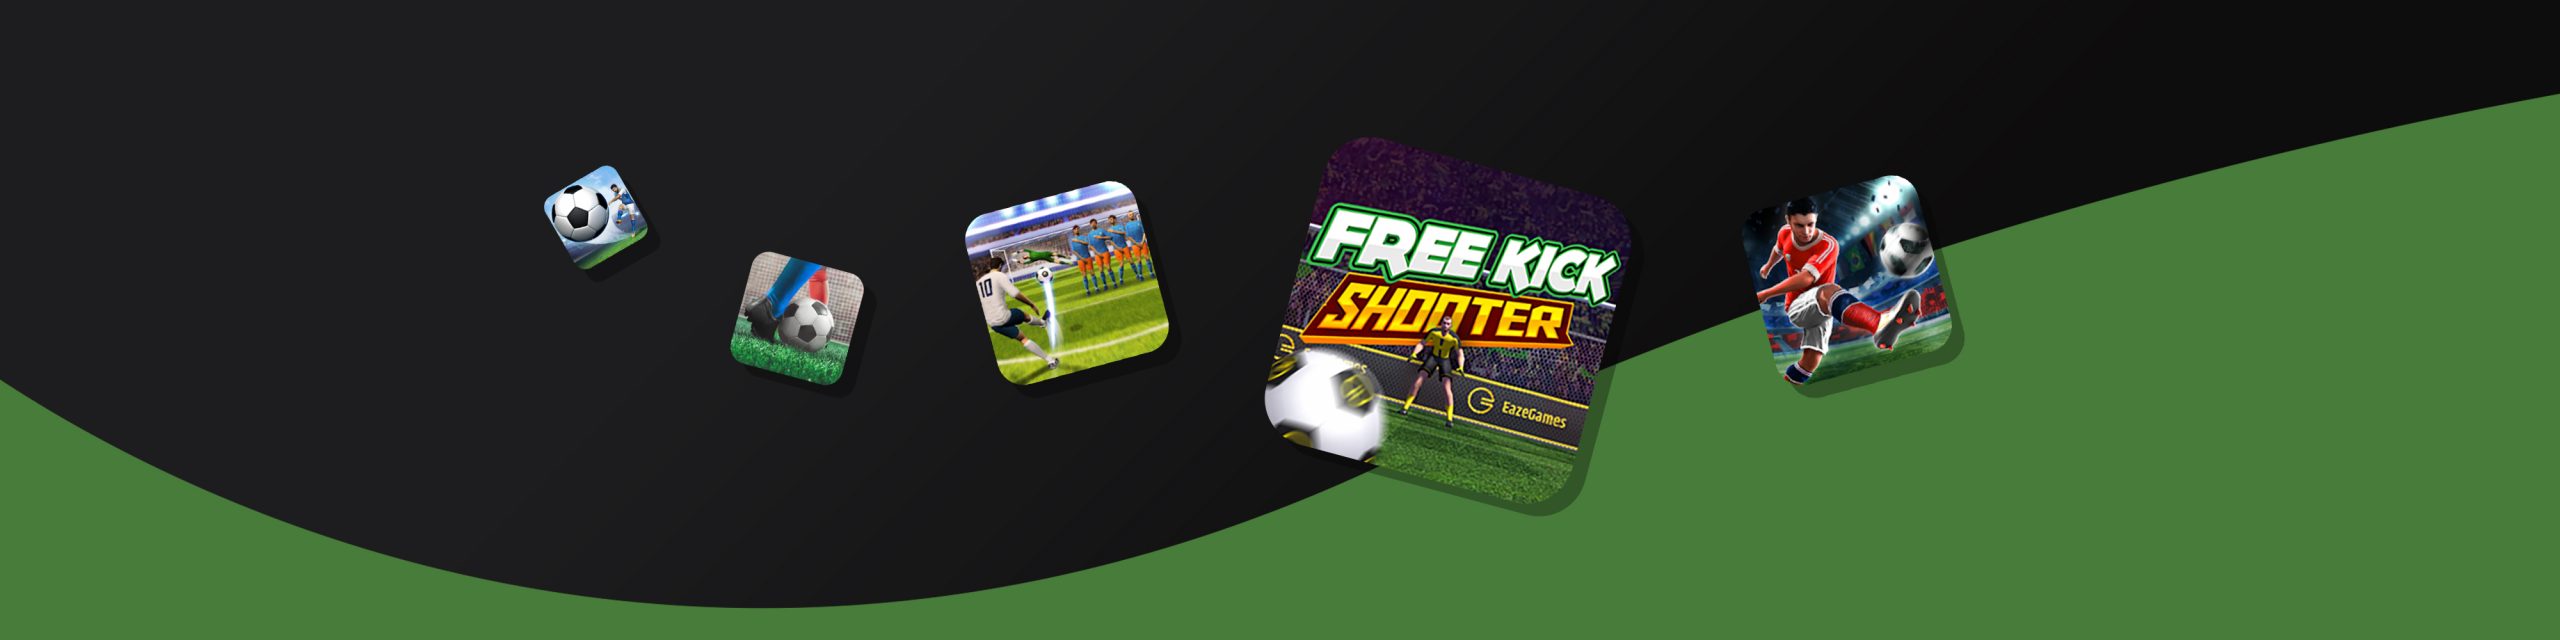 PENALTY SHOOTERS 2 App Trends 2023 PENALTY SHOOTERS 2 Revenue, Downloads  and Ratings Statistics - AppstoreSpy